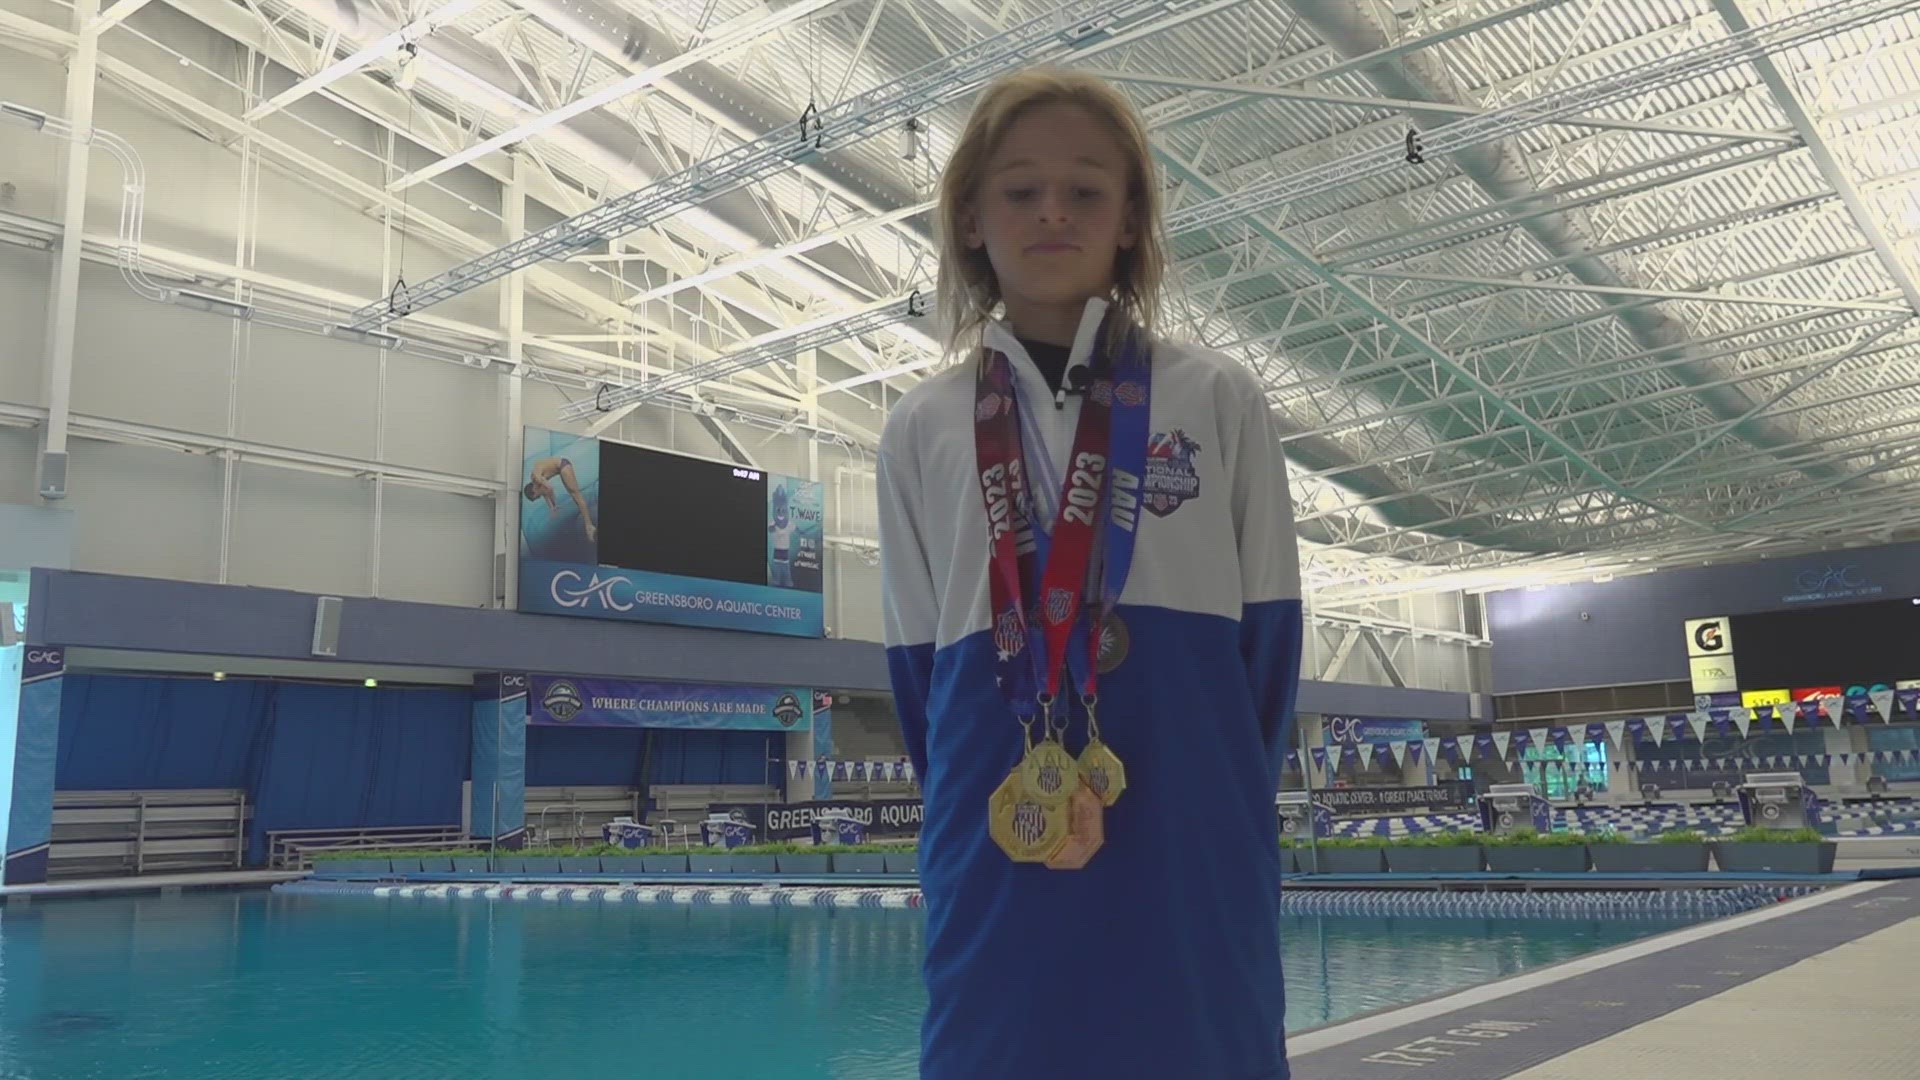 Jaelen Gilkey talked to the amazing 9-year-old about her journey through diving and her hopes for the future.